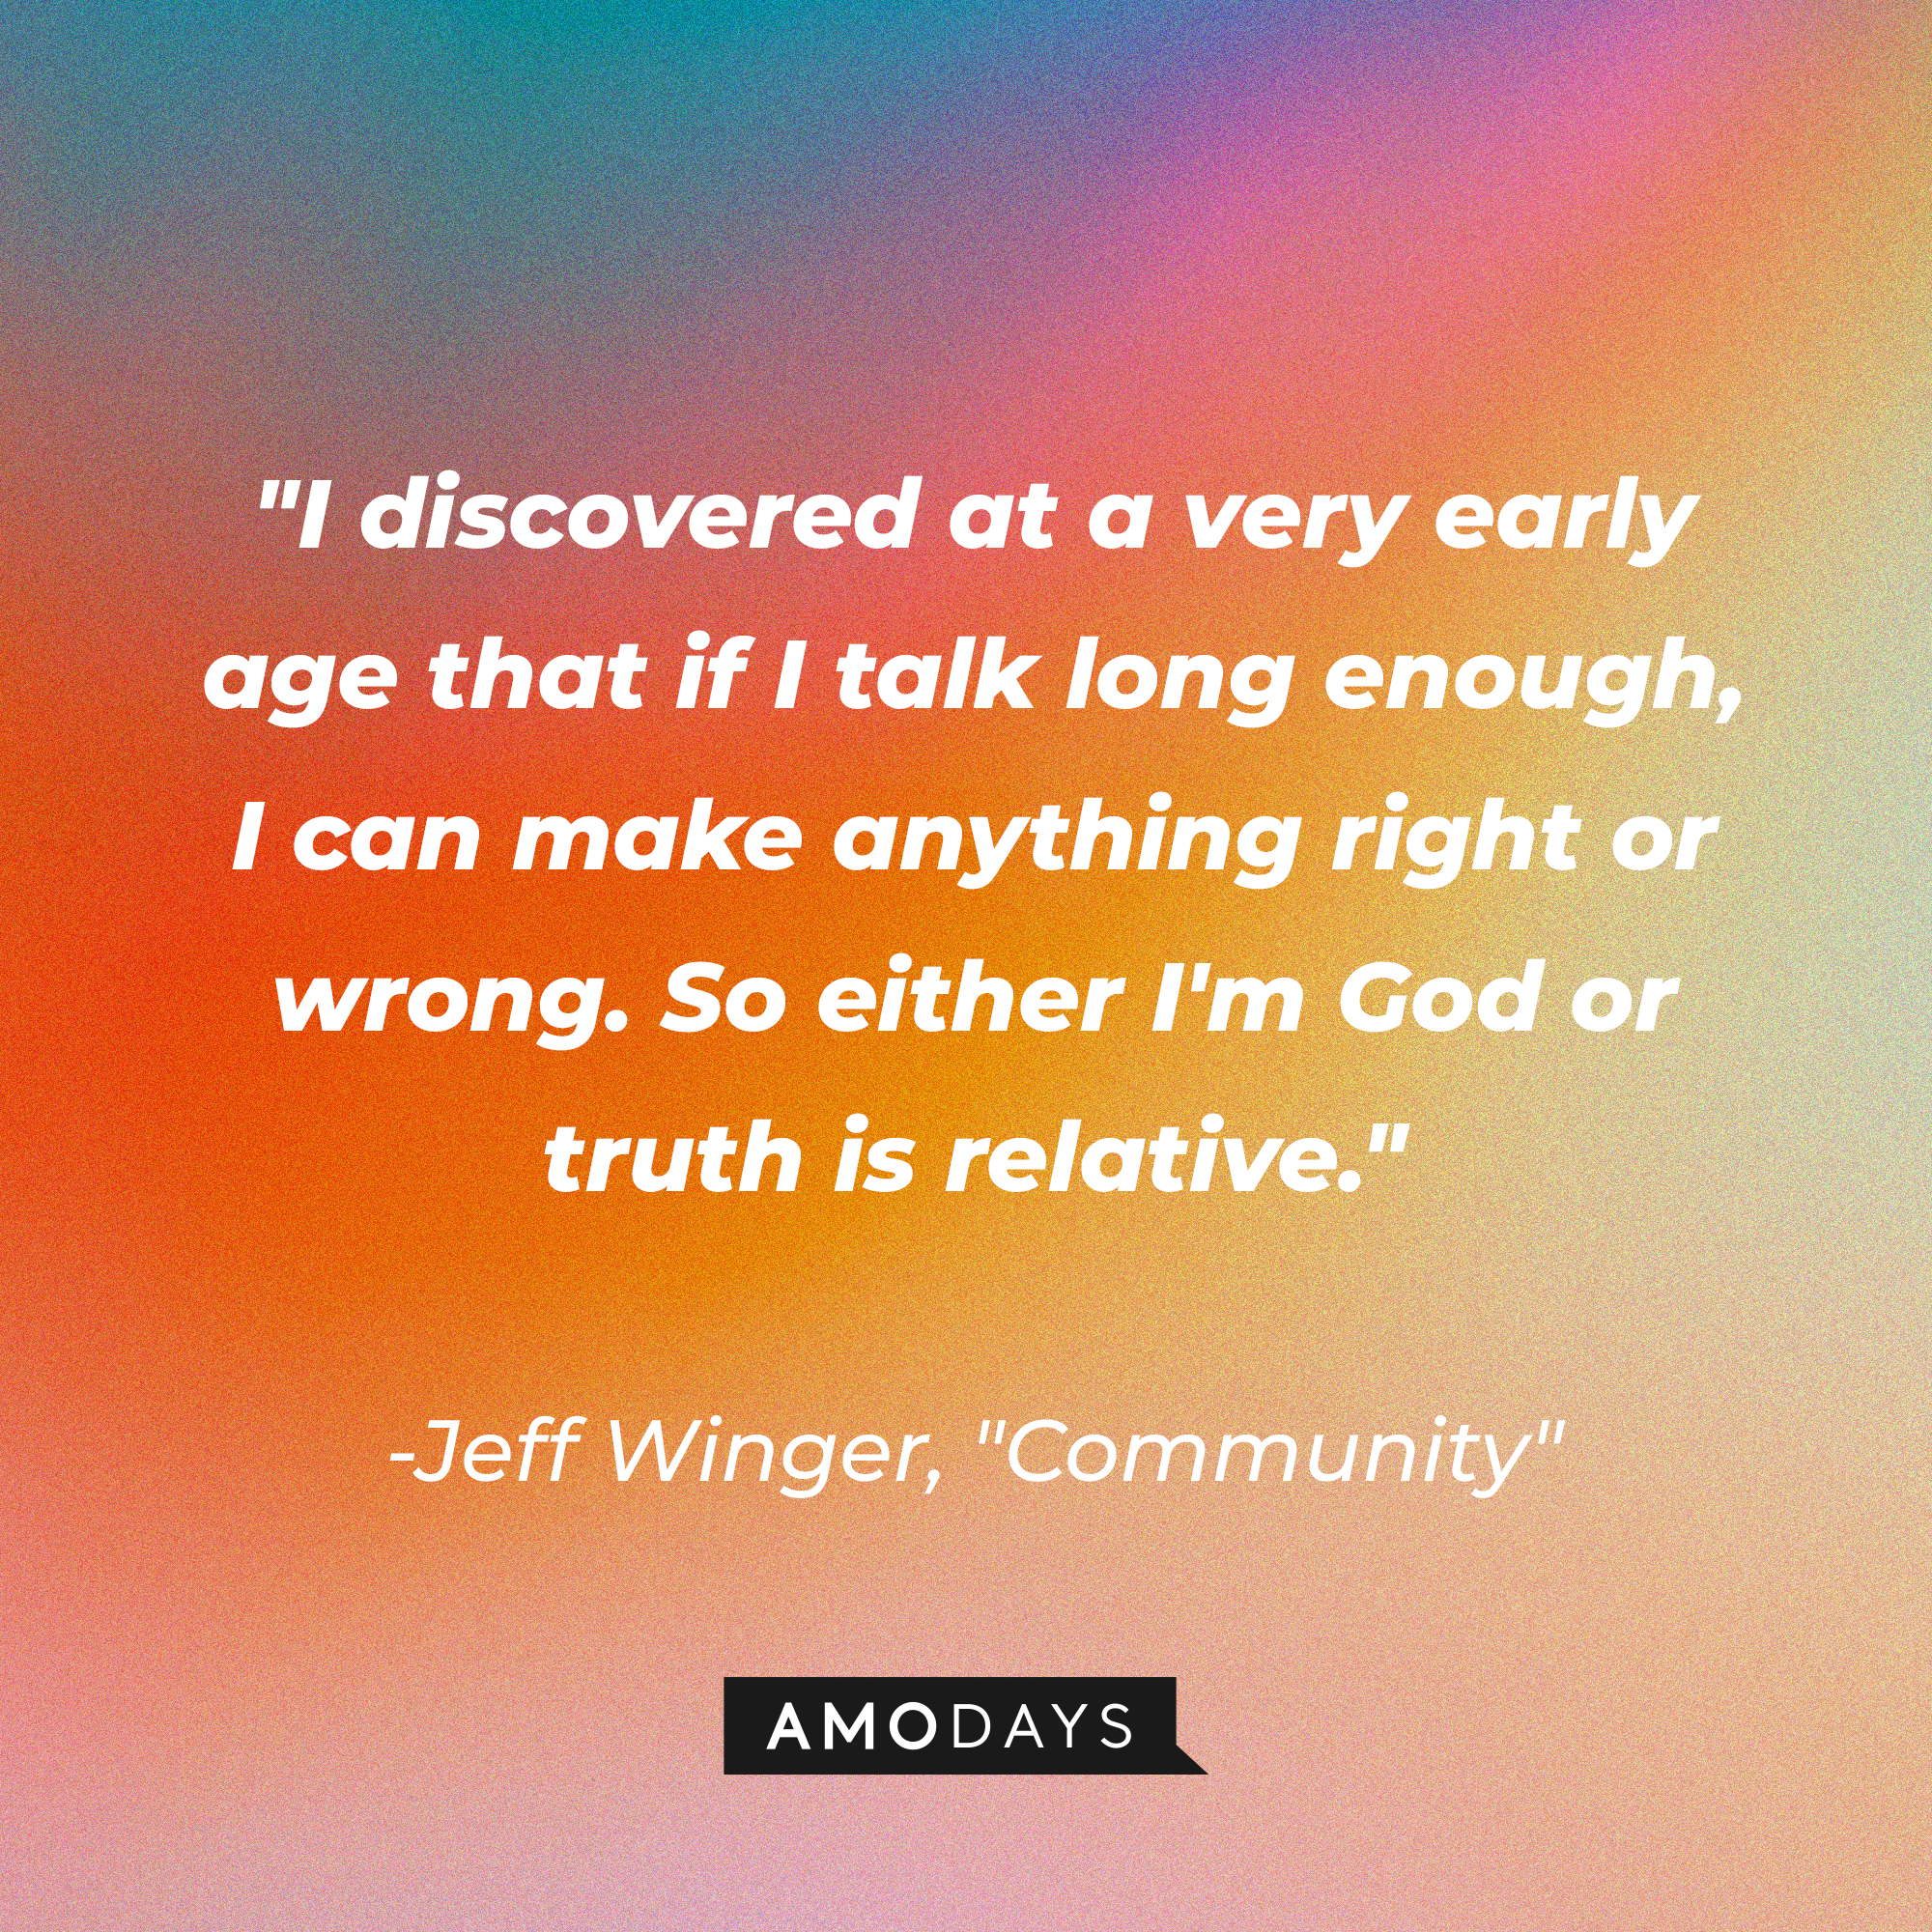 Jeff Winger's quote: "I discovered at a very early age that if I talk long enough, I can make anything right or wrong. So either I'm God or truth is relative." | Source: Amodays